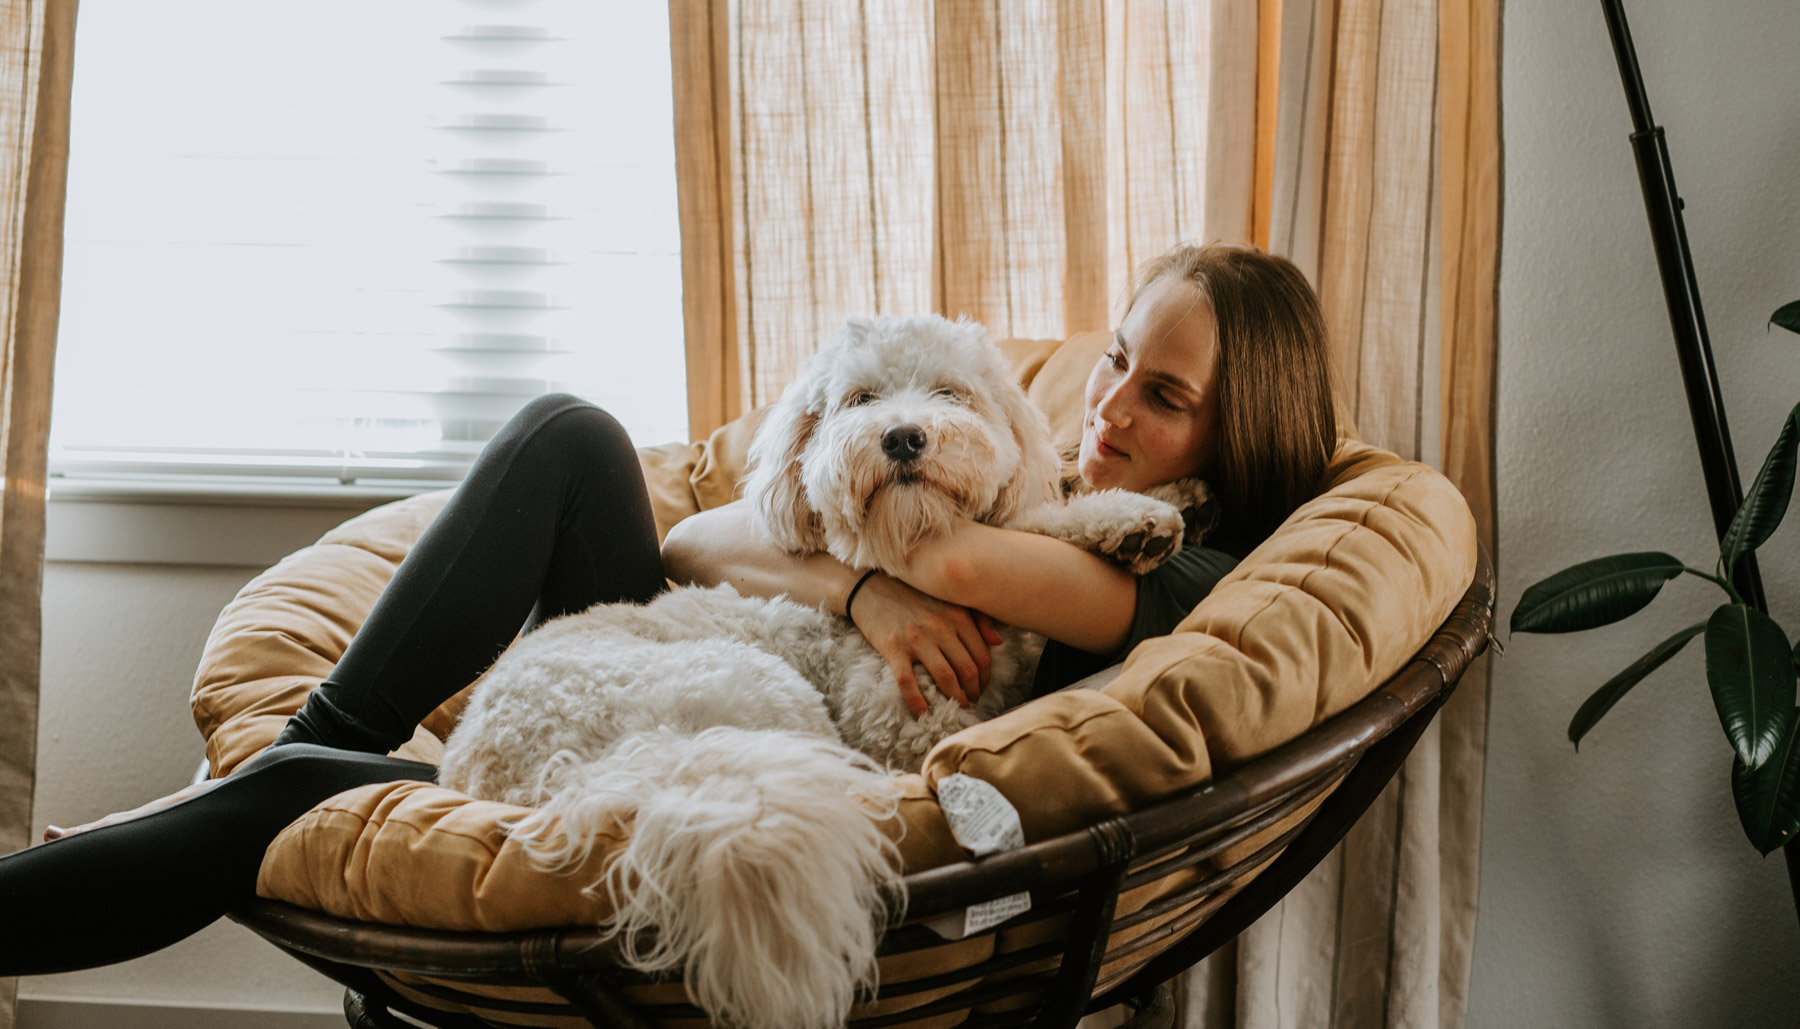 Woman cuddled up with dog in chair